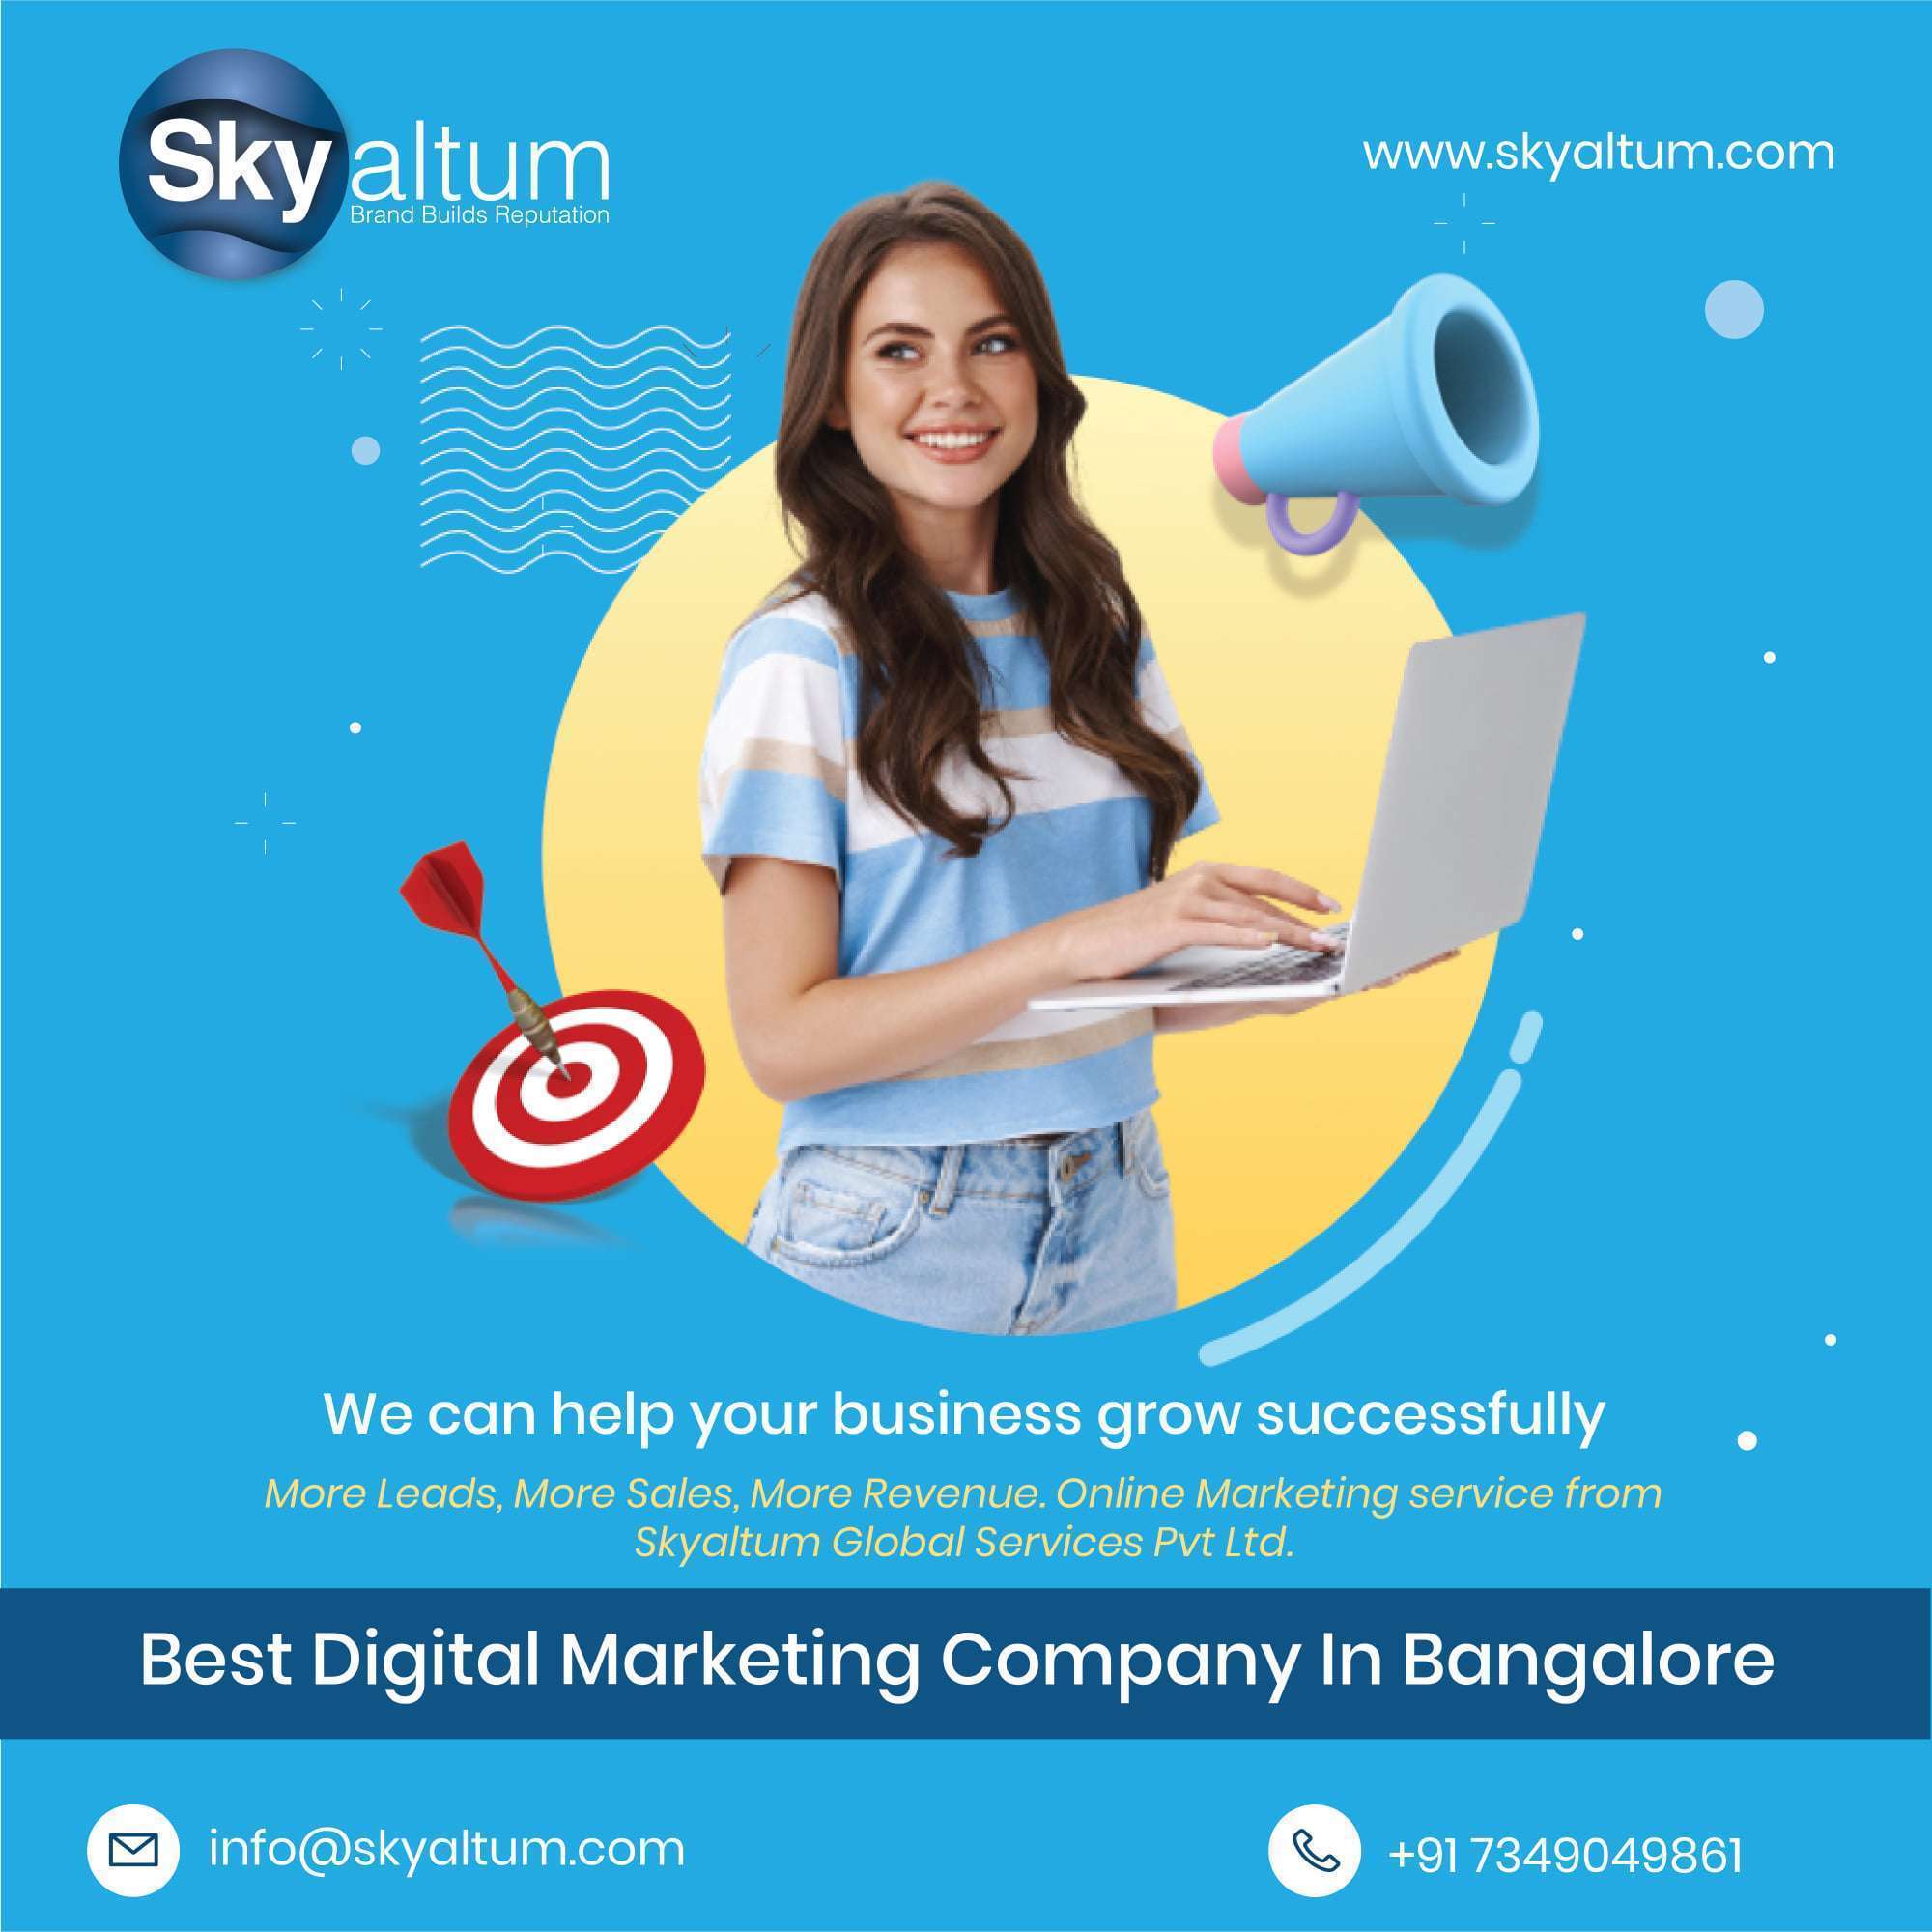 Double your Business with Best Digital Marketing Company in Bangalore